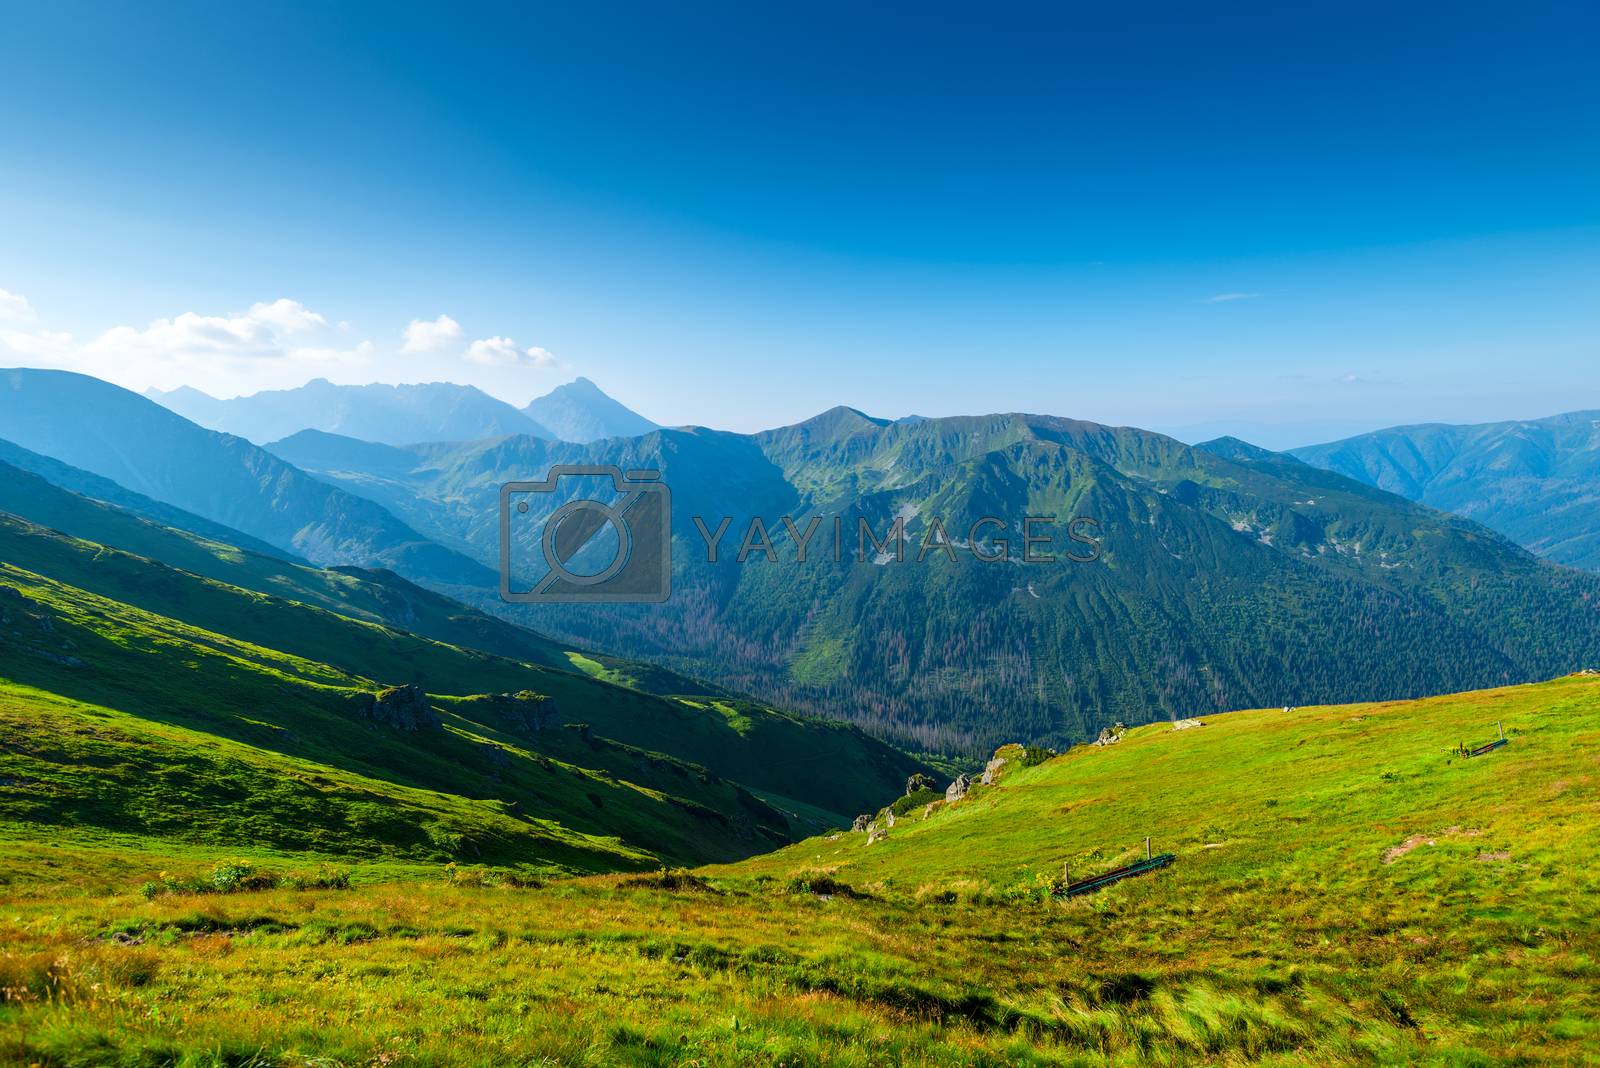 Royalty free image of beautiful green mountain on a sunny summer day at dawn - the Tat by kosmsos111